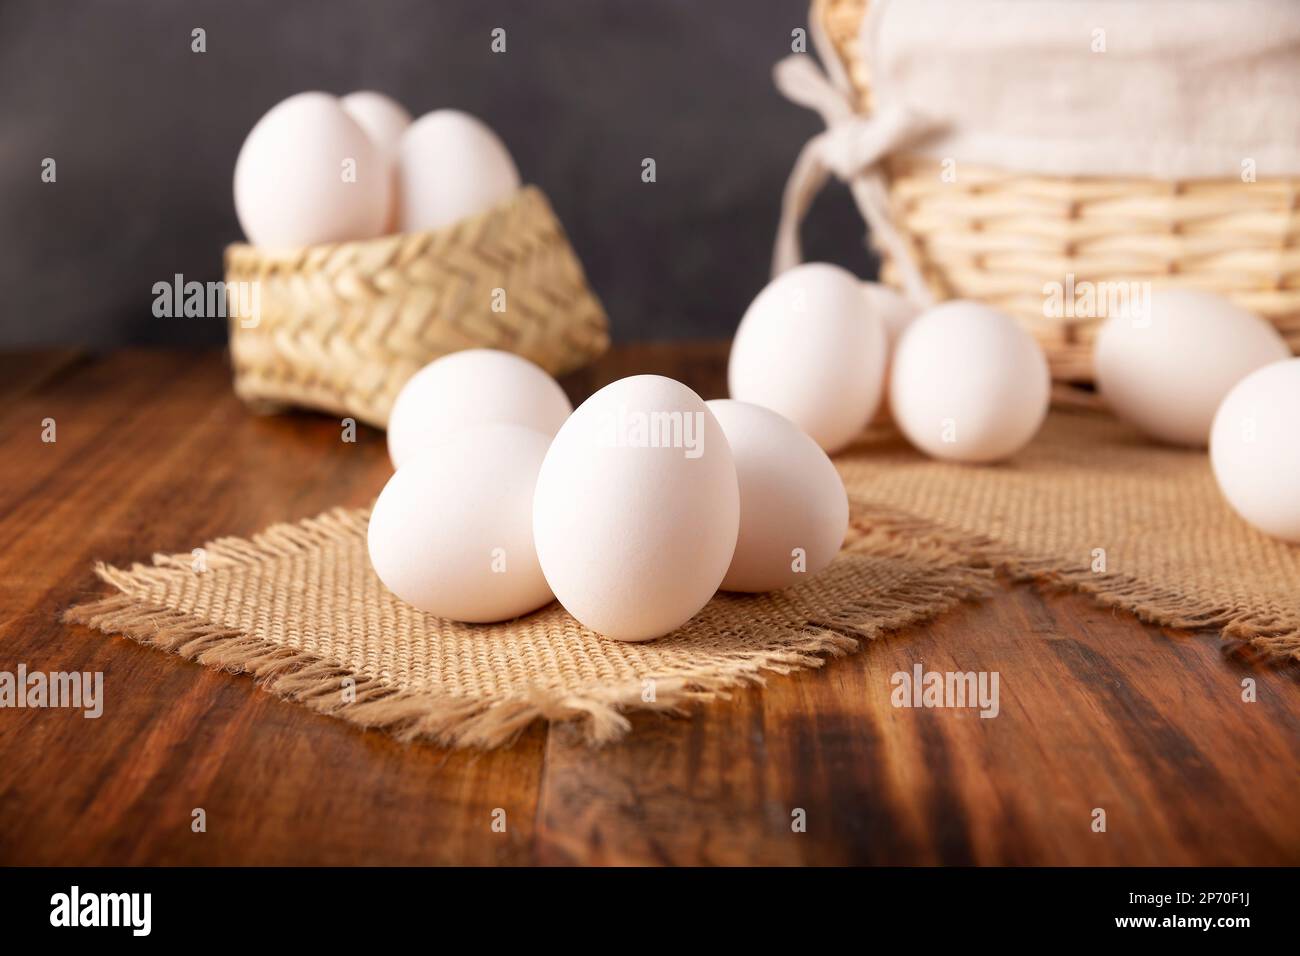 Many white chicken eggs on rustic wooden table. Very popular nutritious and economic food product. Stock Photo